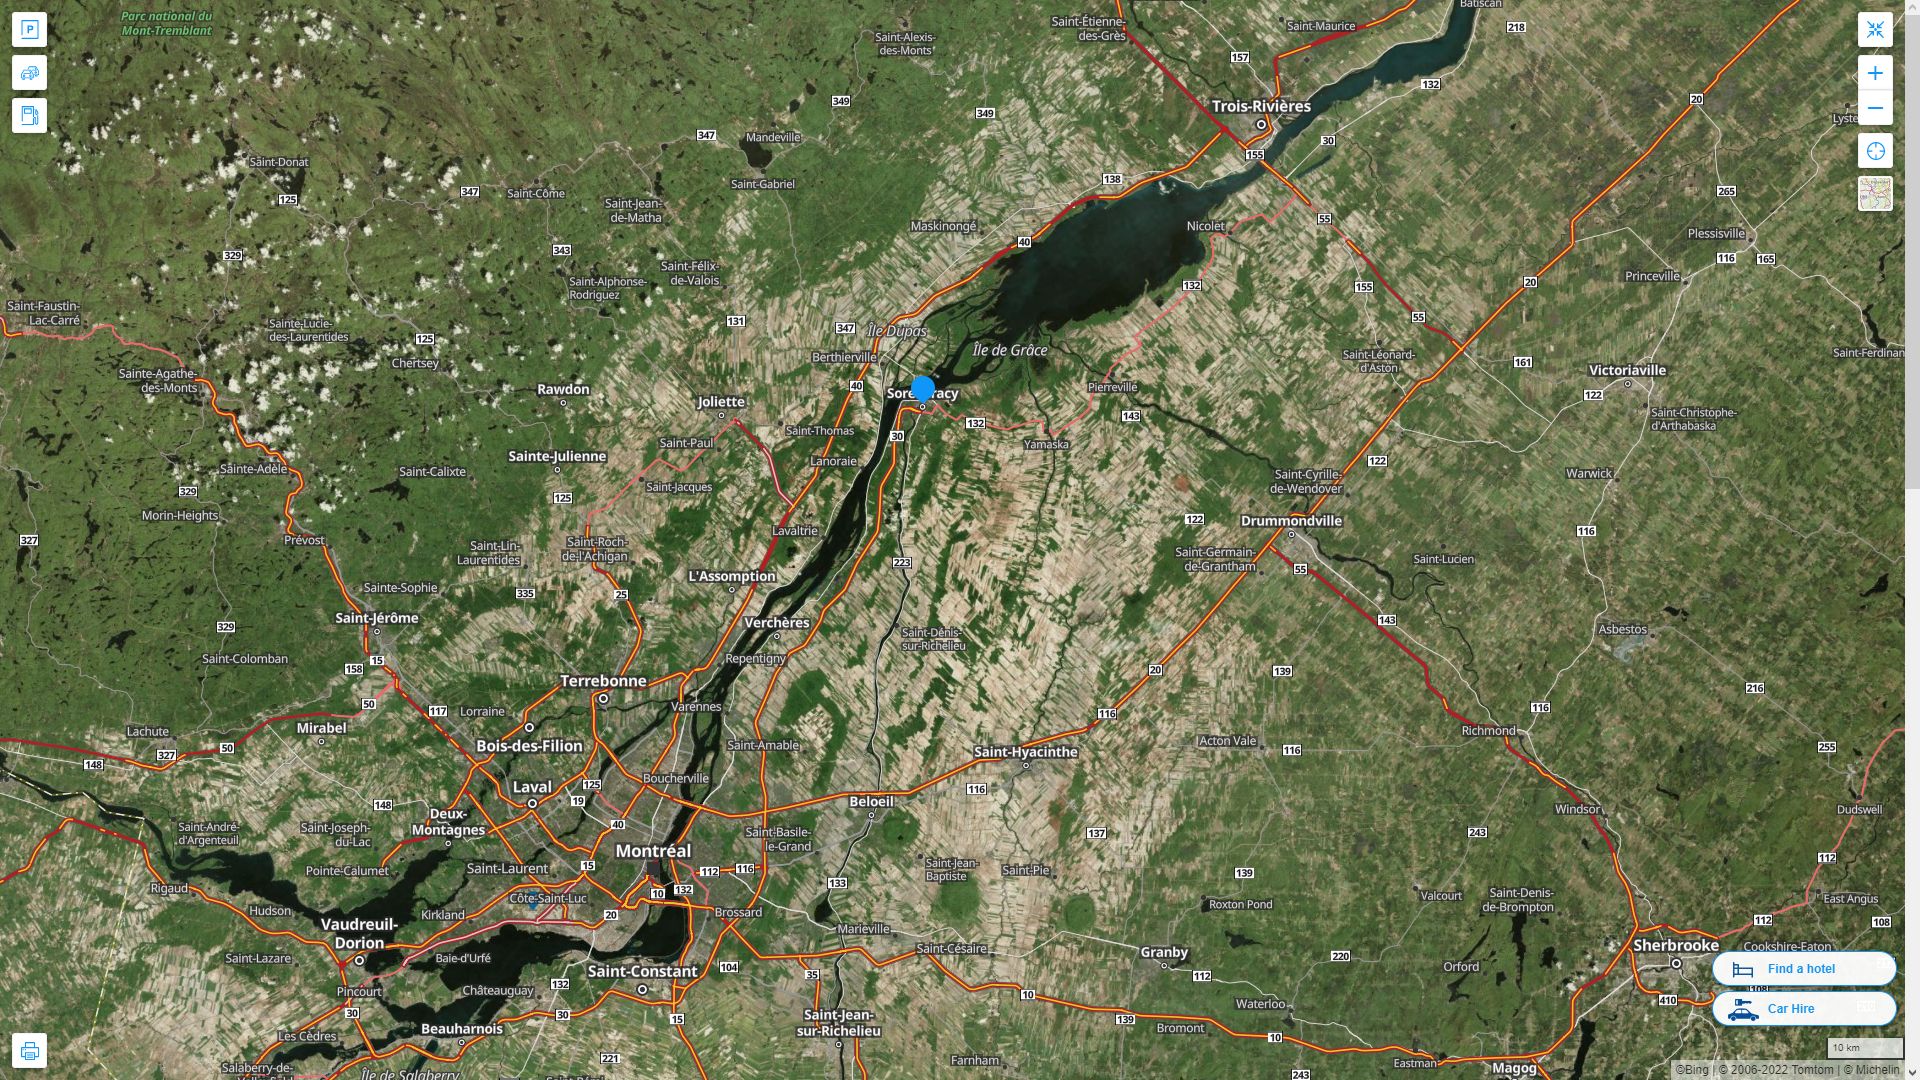 Sorel Tracy Highway and Road Map with Satellite View